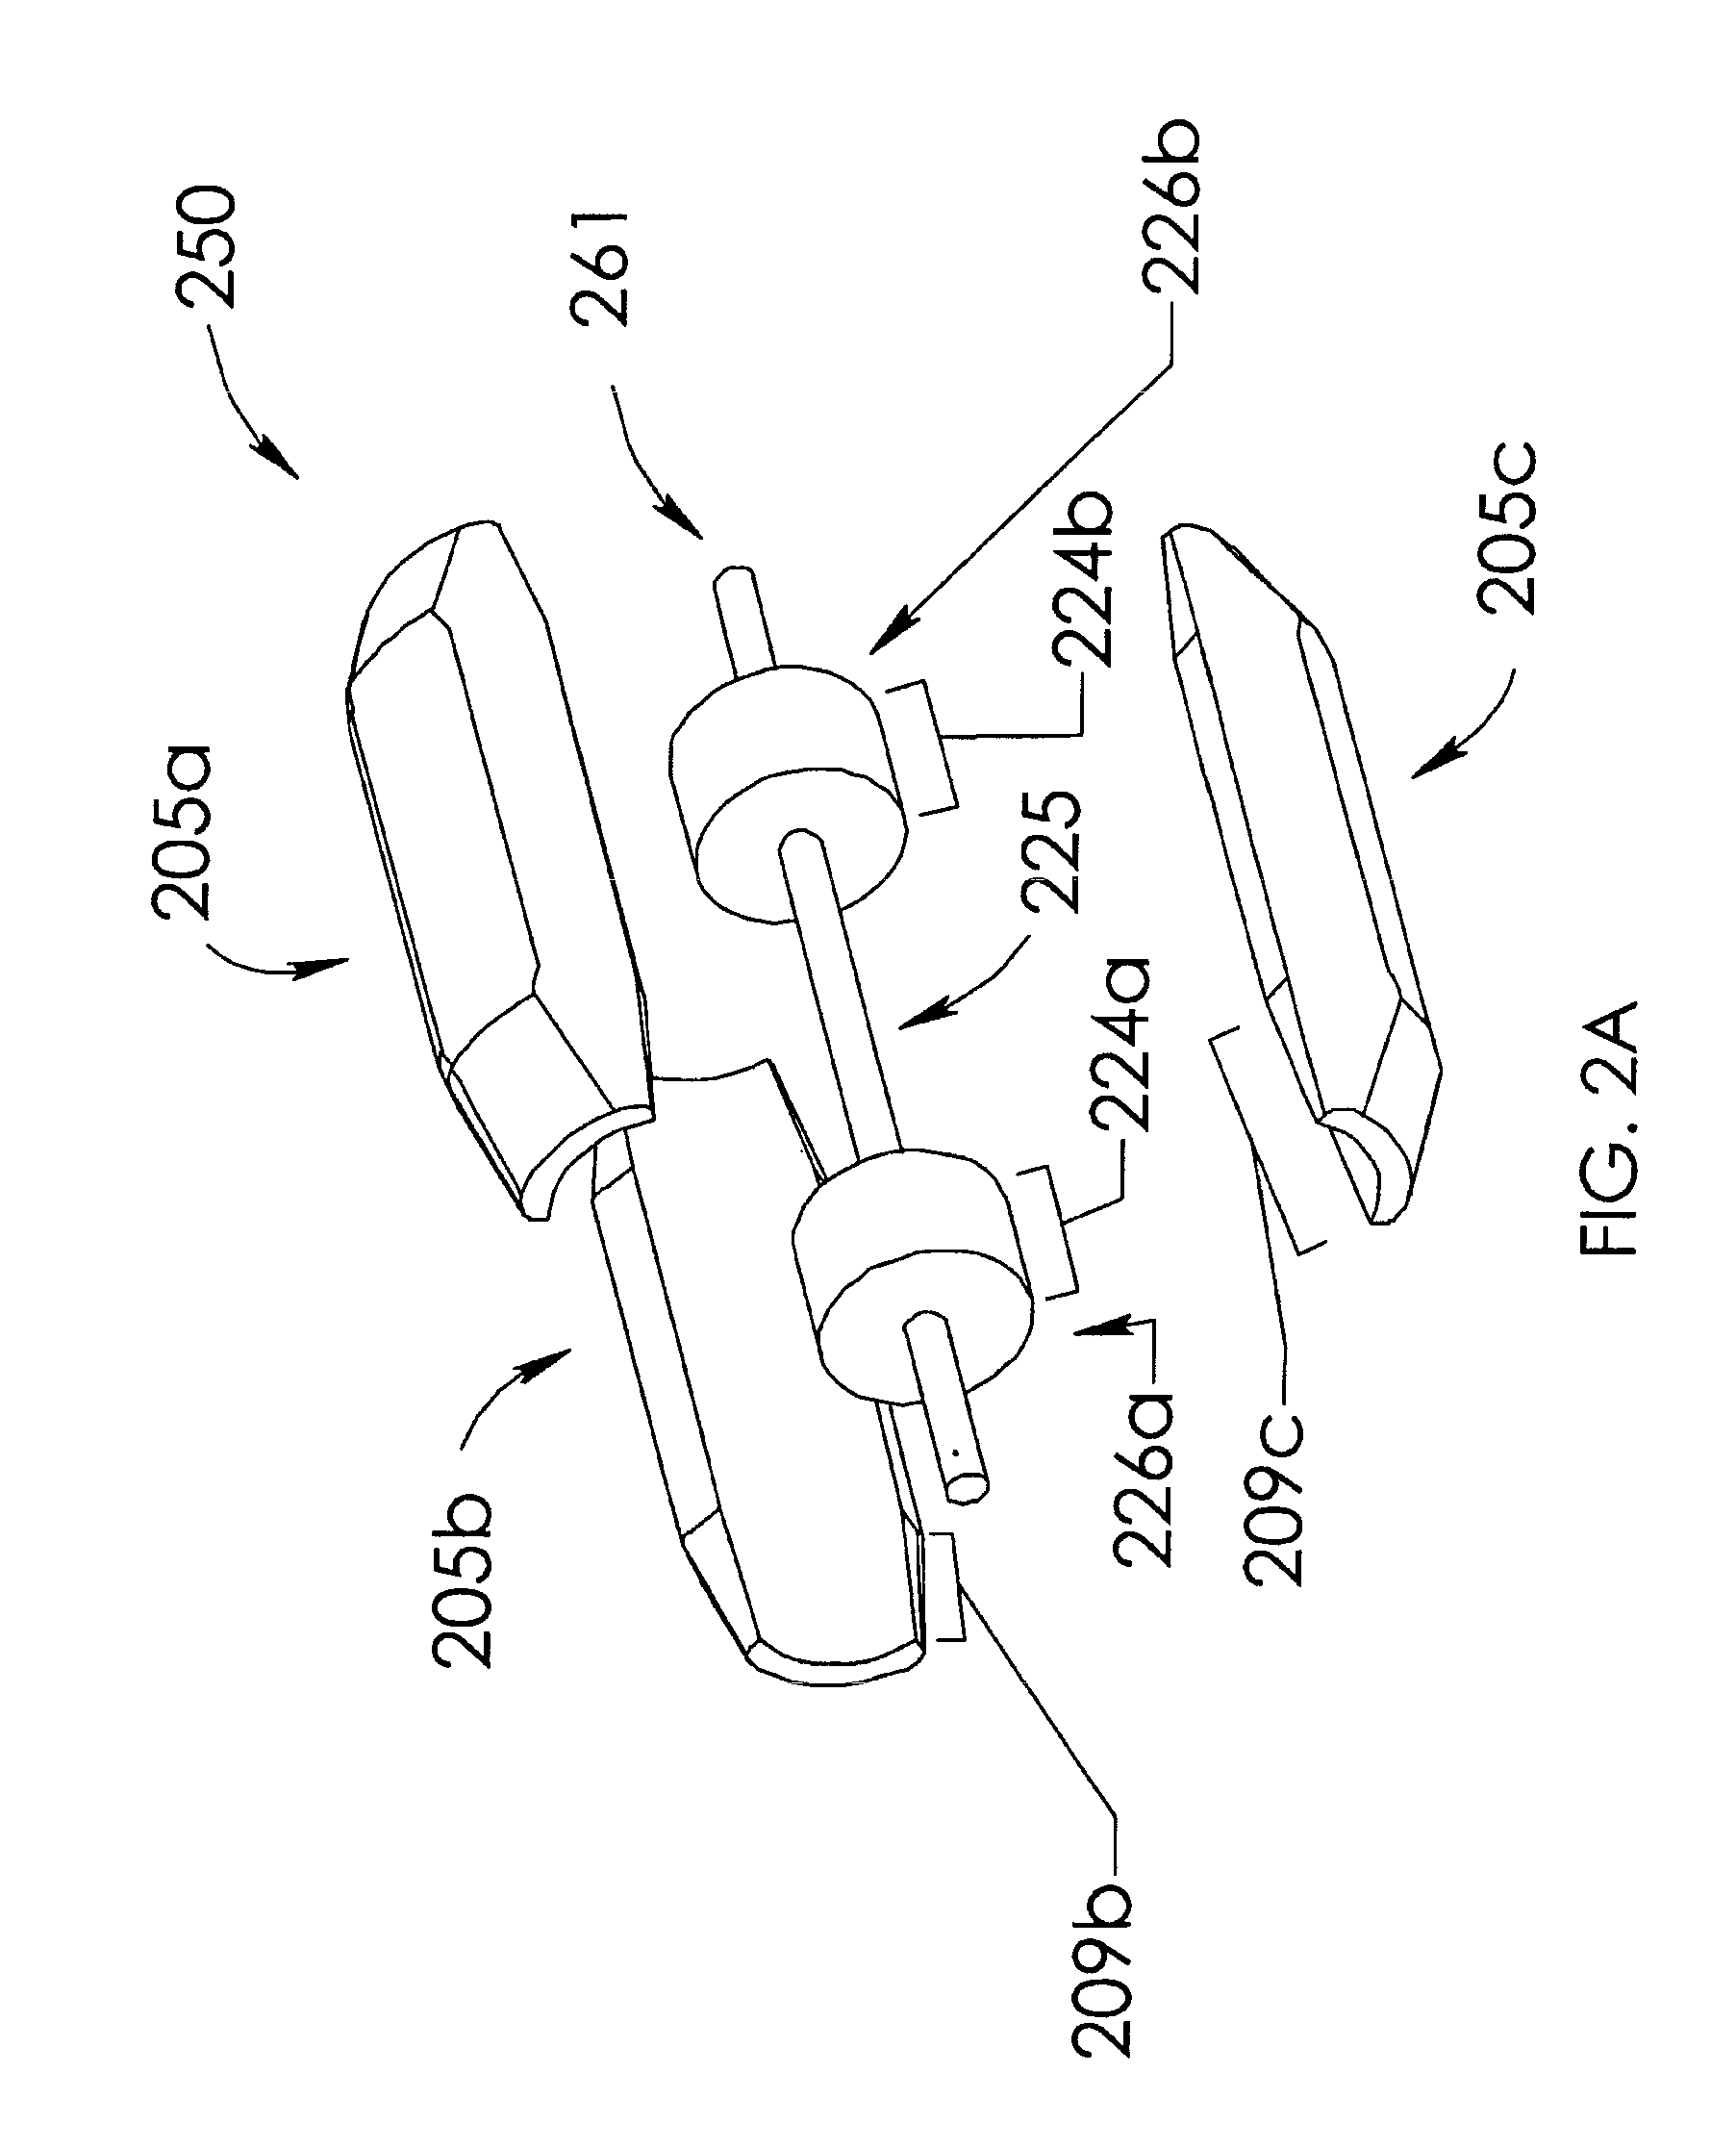 Stator and rotor-stator structures for electrodynamic machines